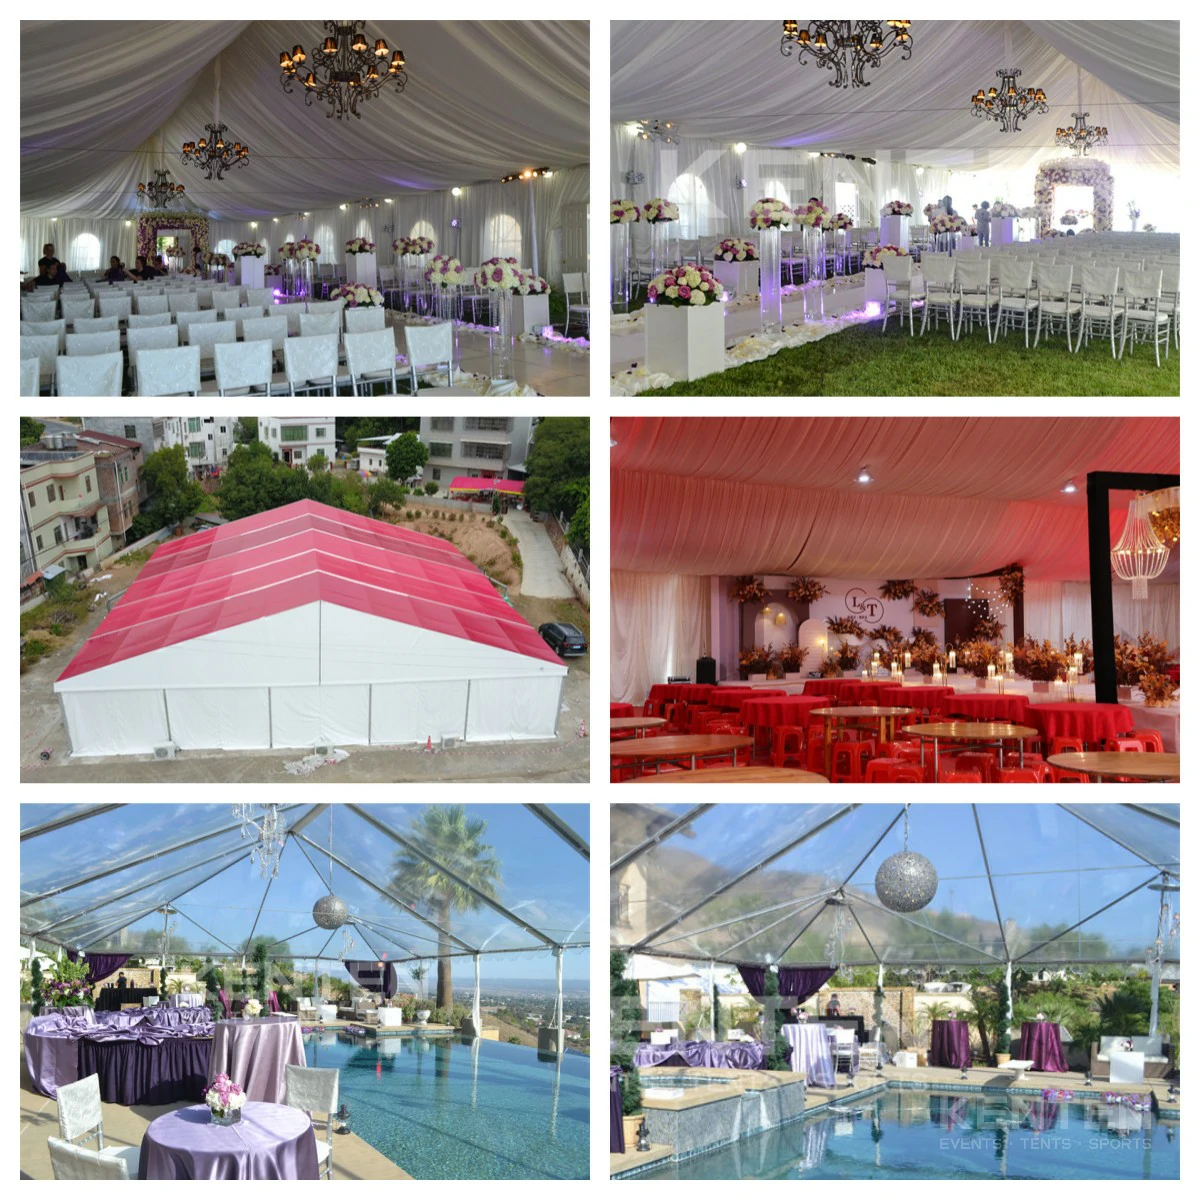 Our Wedding Tent Cases